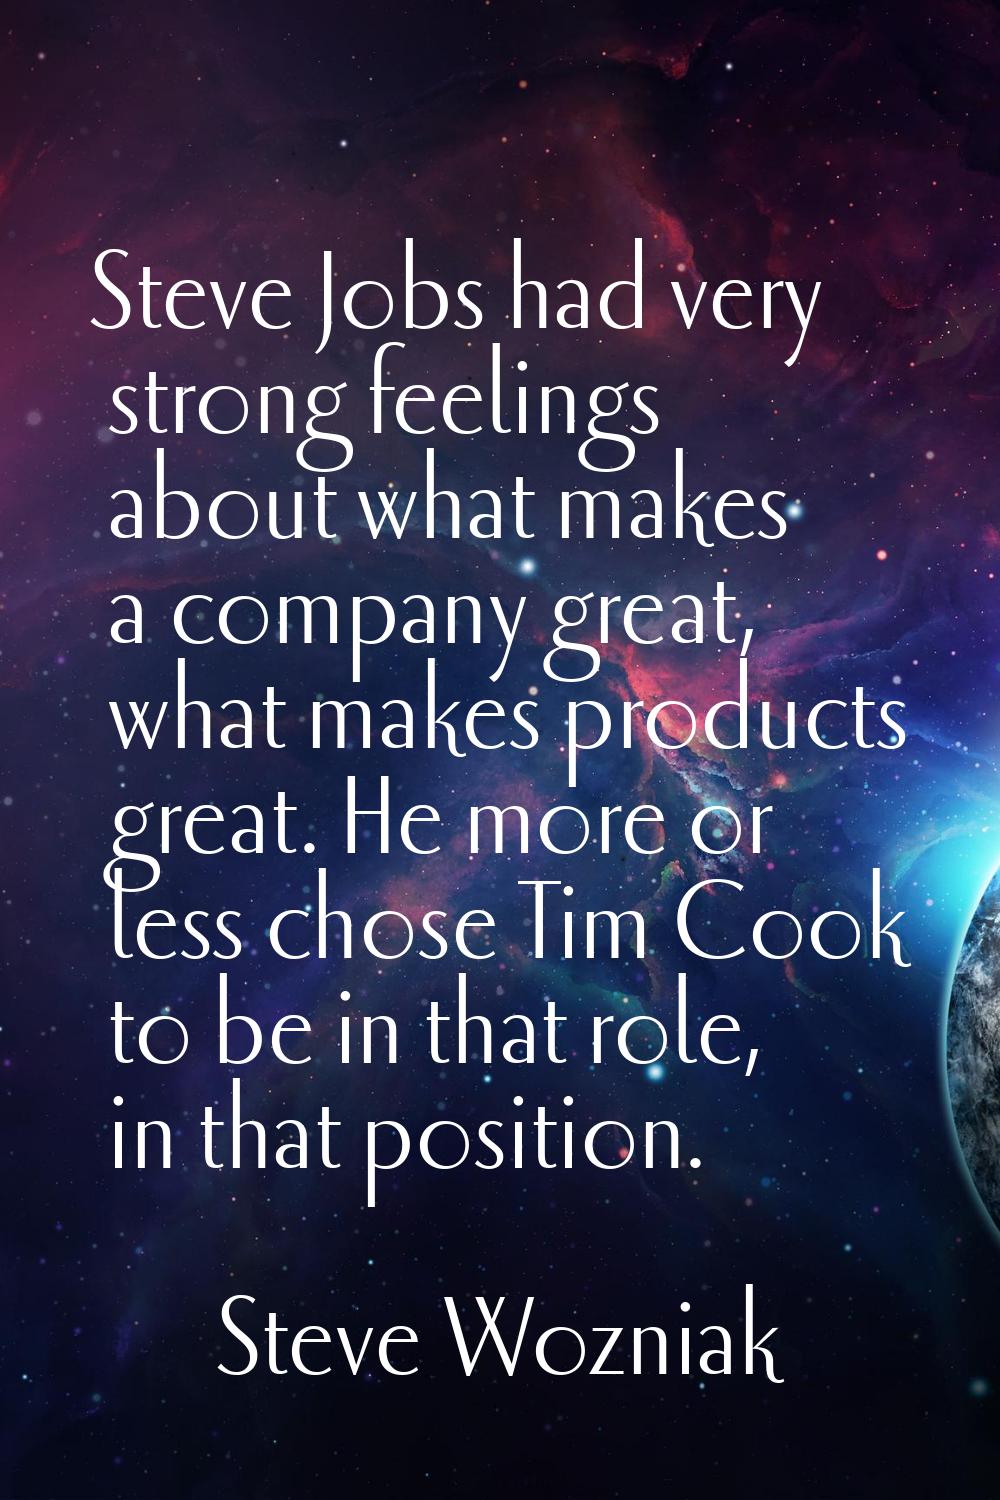 Steve Jobs had very strong feelings about what makes a company great, what makes products great. He